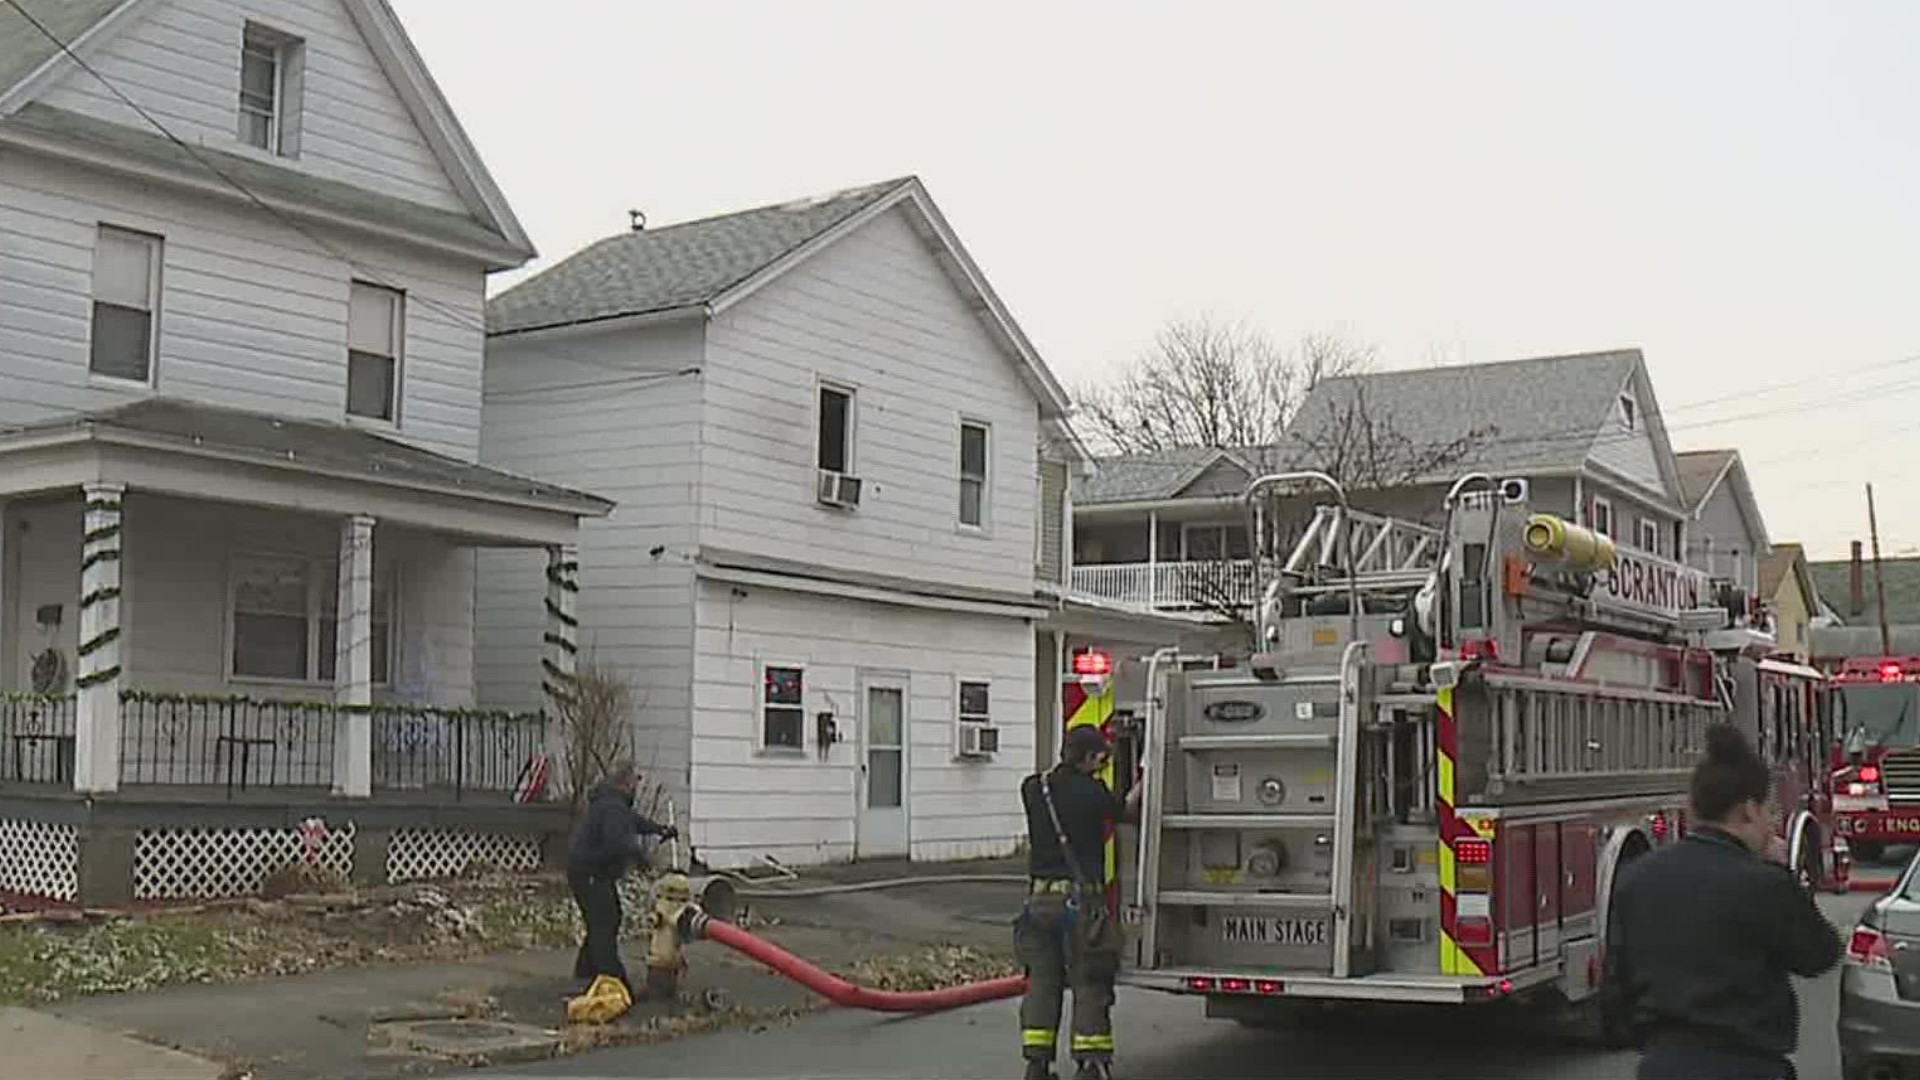 One woman is displaced after a fire Thursday afternoon in Scranton.